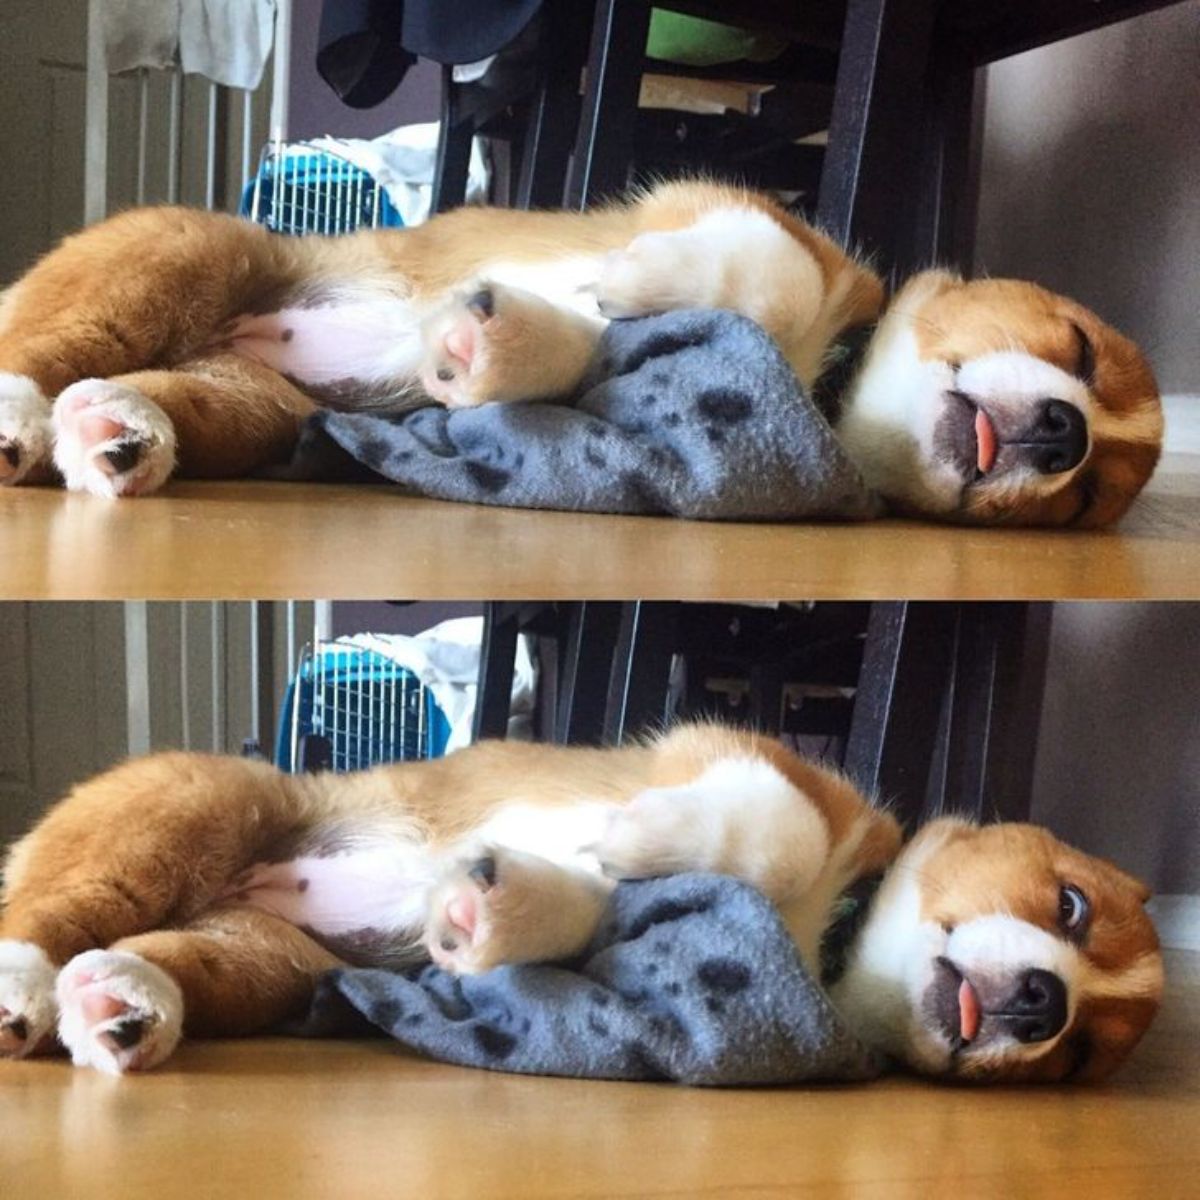 2 photos of a brown and white corgi puppy sleeping with a blue and black blanket on the floor